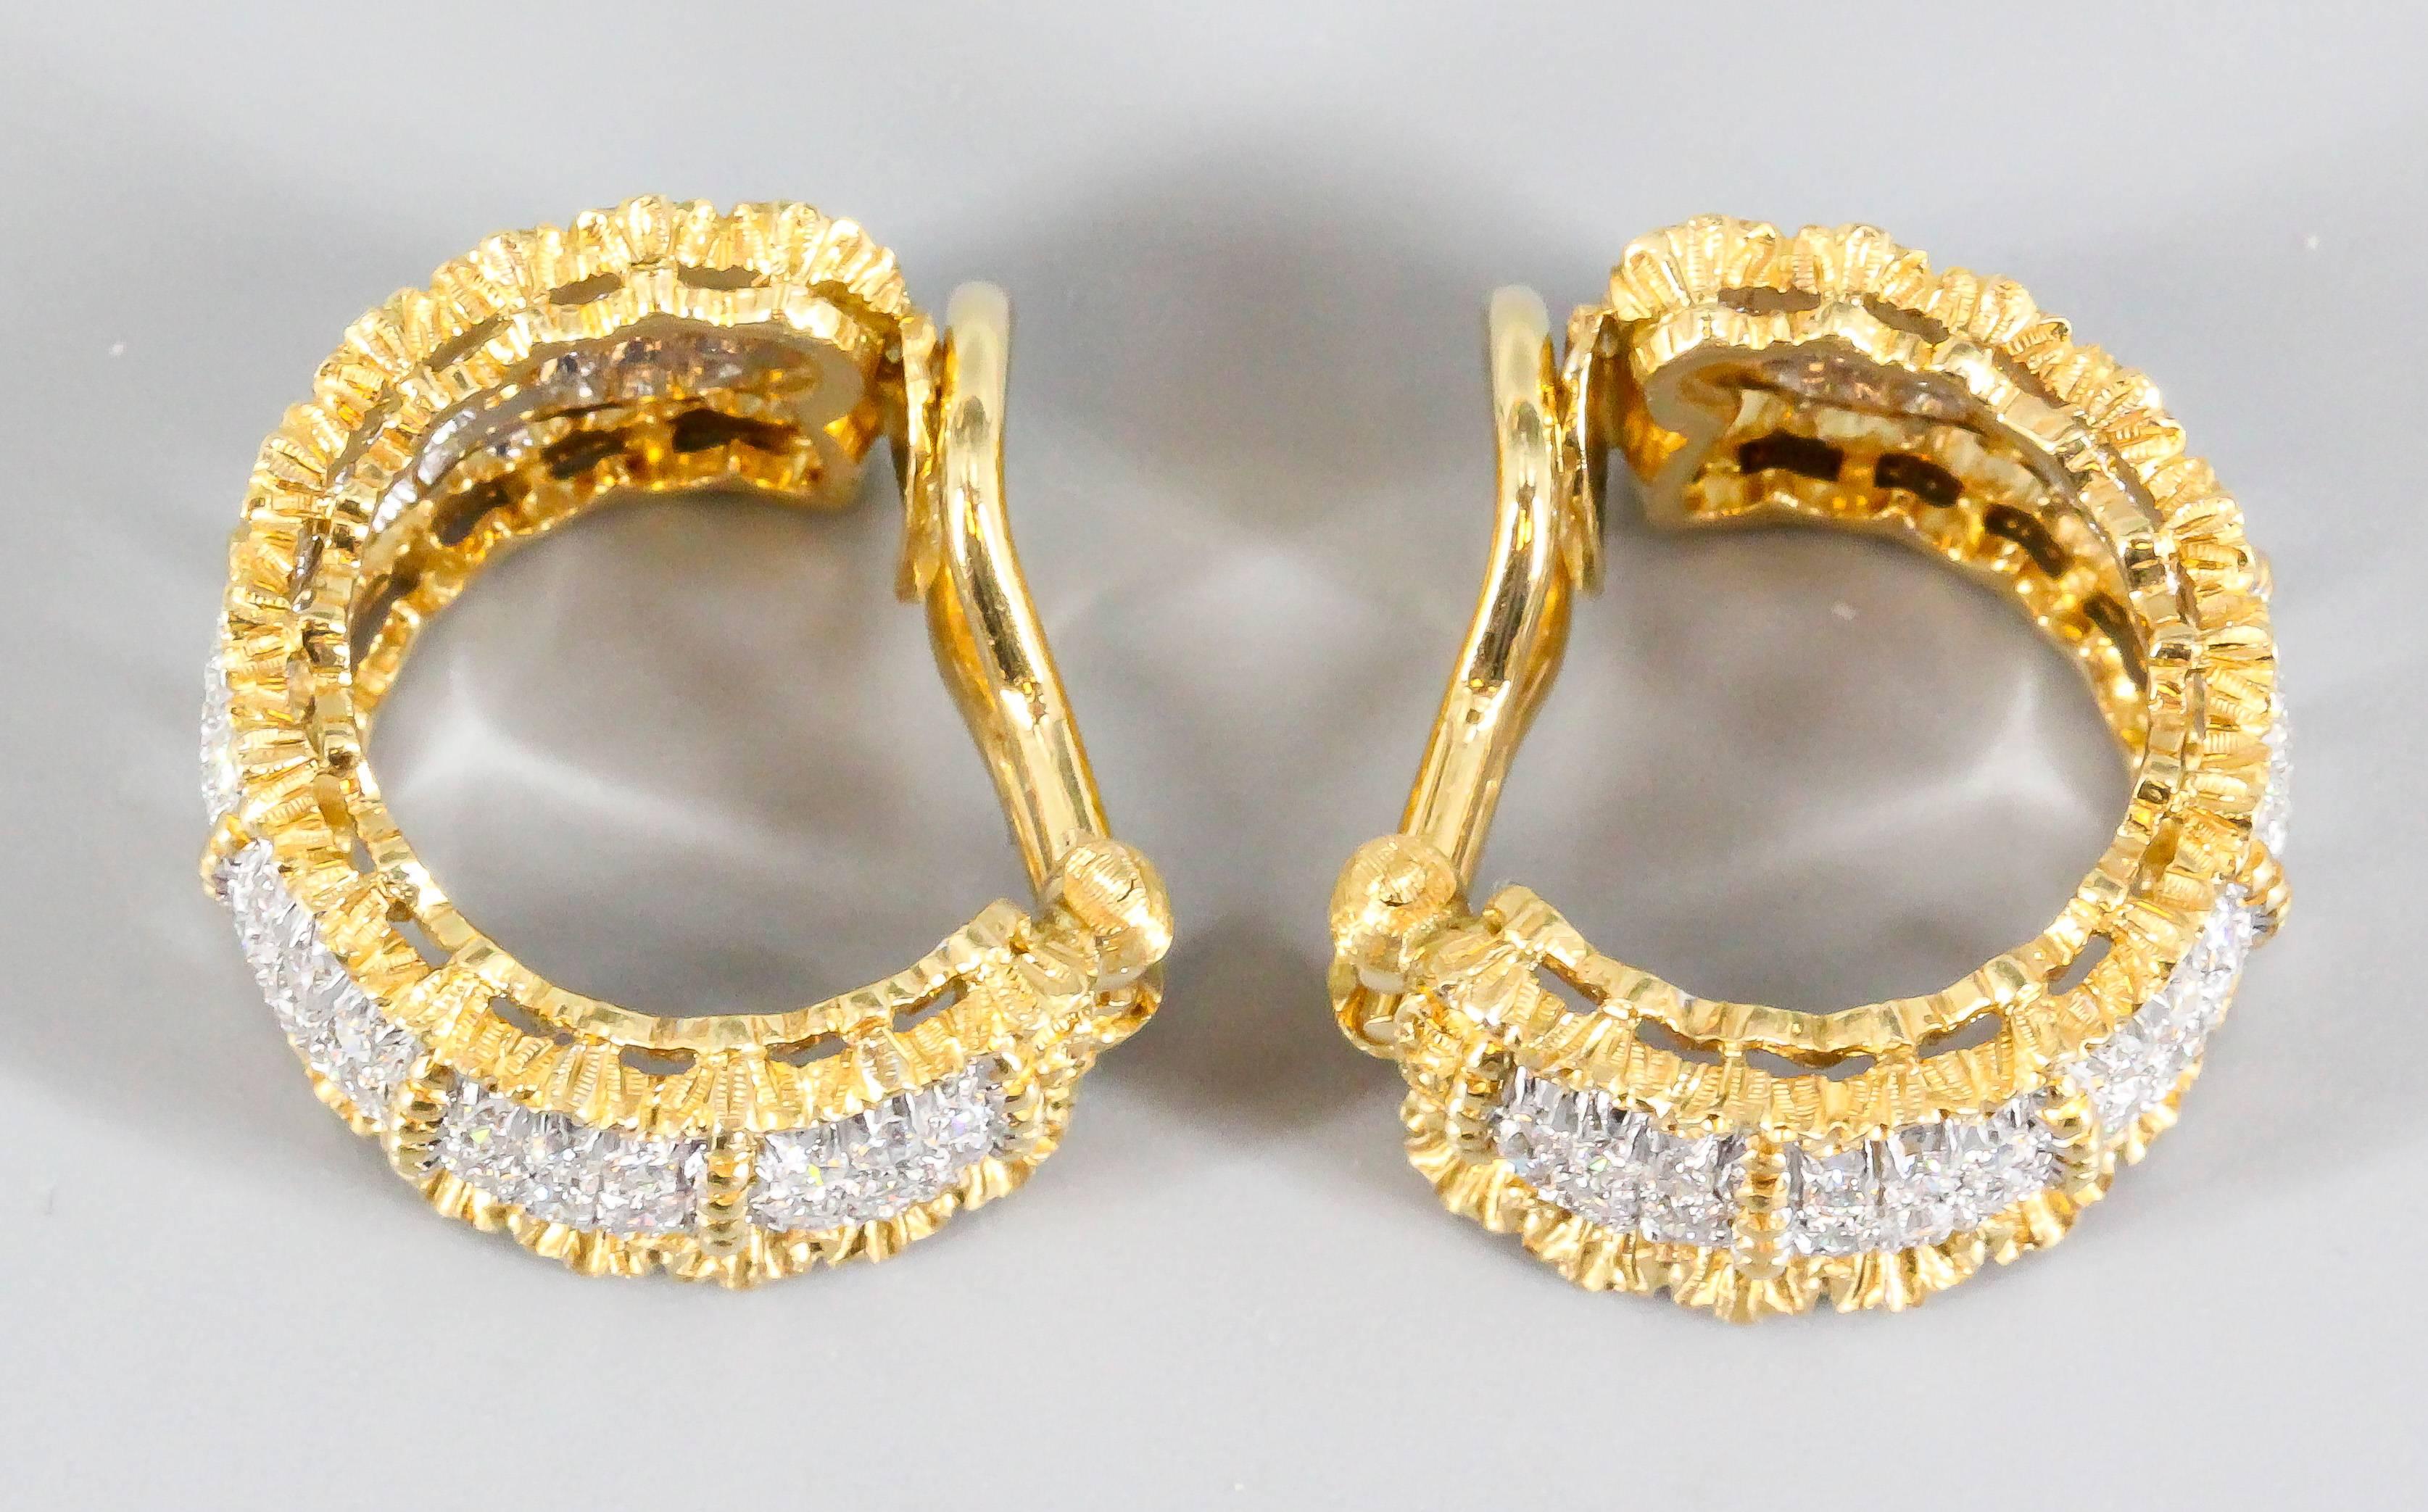 Elegant diamond and 18K white and yellow gold ear clips by Buccellati. They feature high grade round brilliant cut diamonds in a pave type setting. Beautiful intricate workmanship customary to Buccellati.  A stunning and easy to wear set of